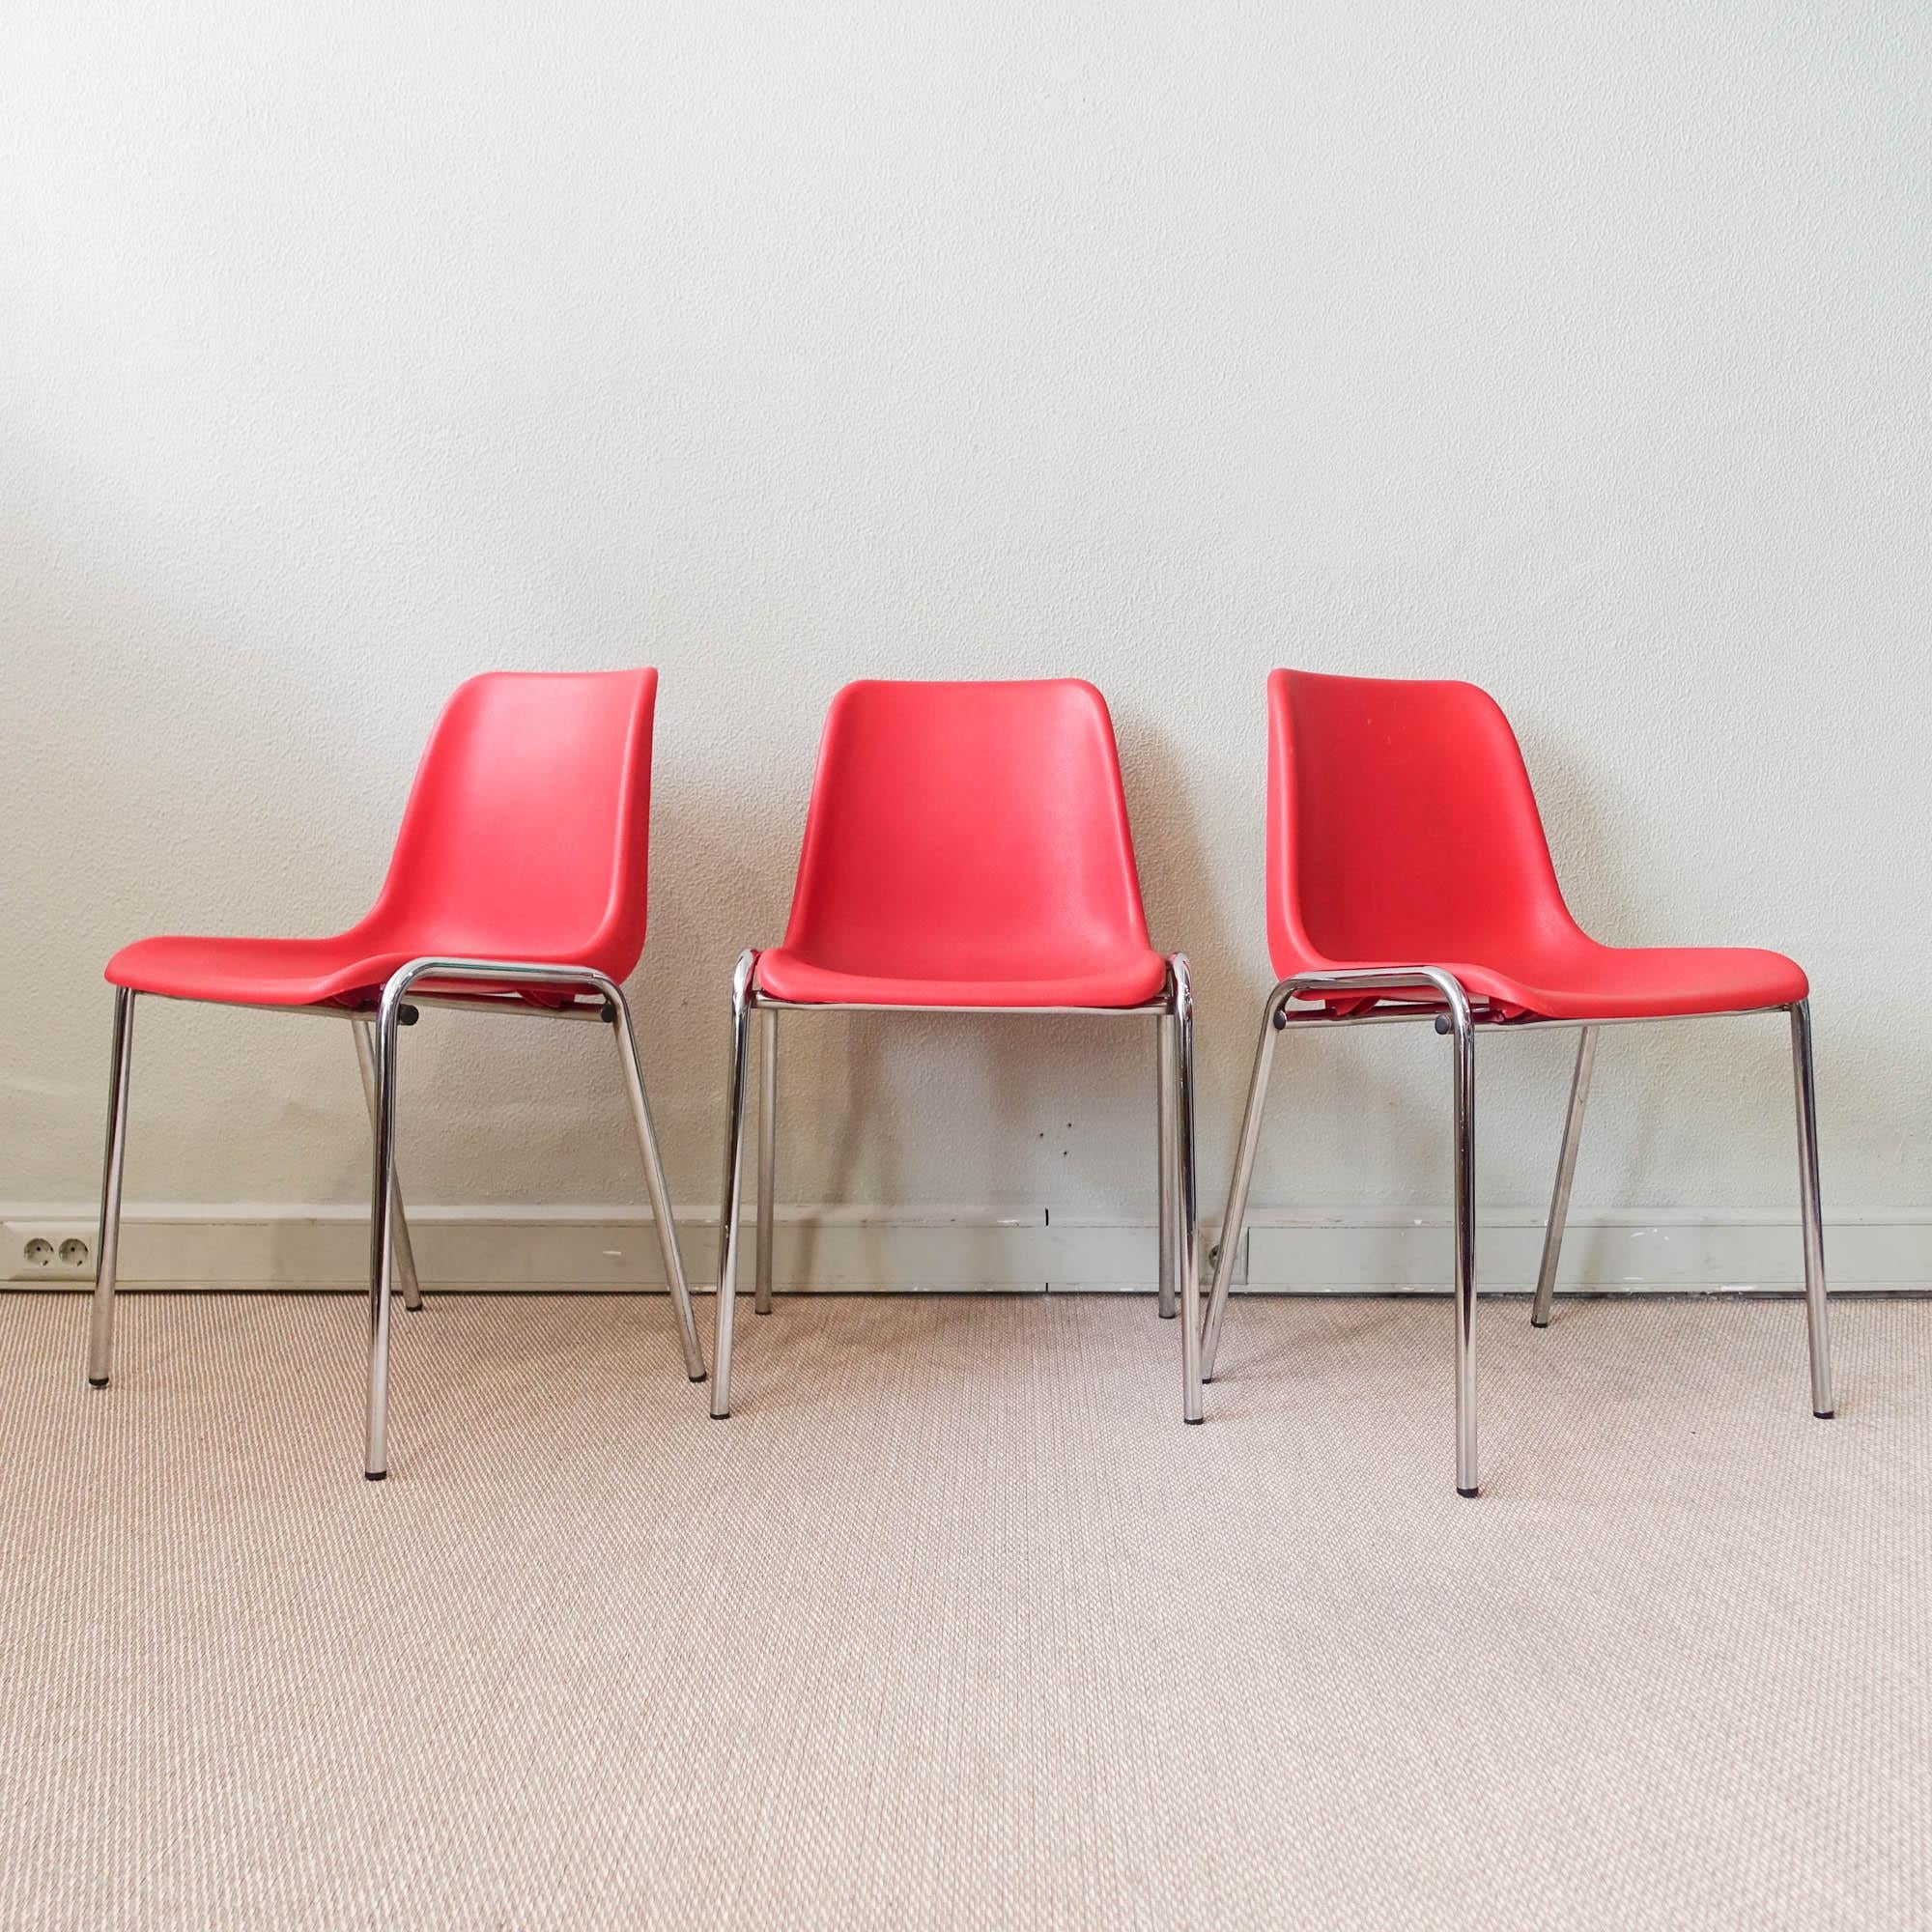 Set of 10 Multicolored Stackable Chairs in the Style of Helmut Starke, 1970s For Sale 7